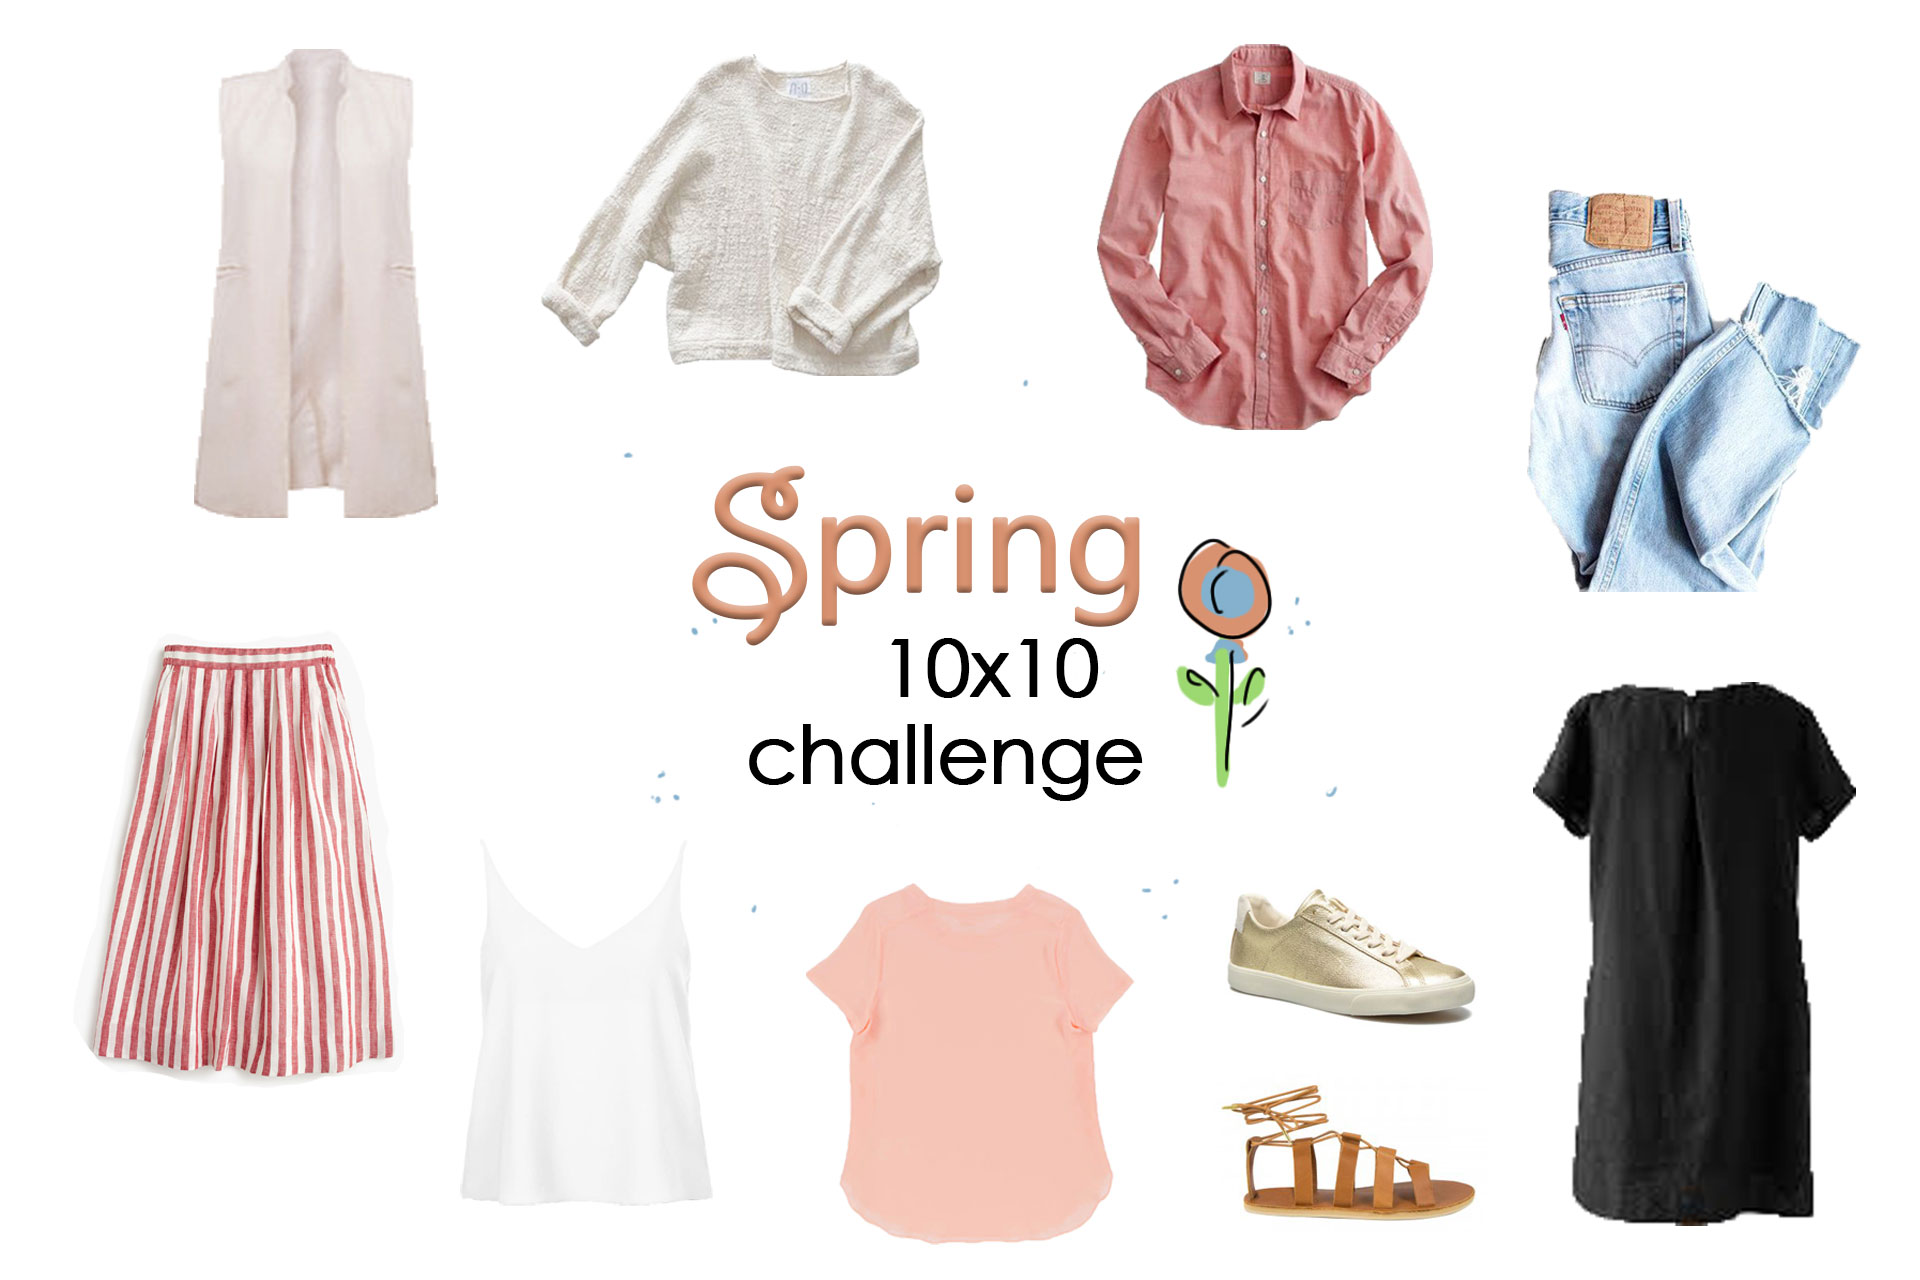 Comfy 10x10 Challenge + Small Sustainable Clothing Brands to Support Right  Now - Her Simple Sole